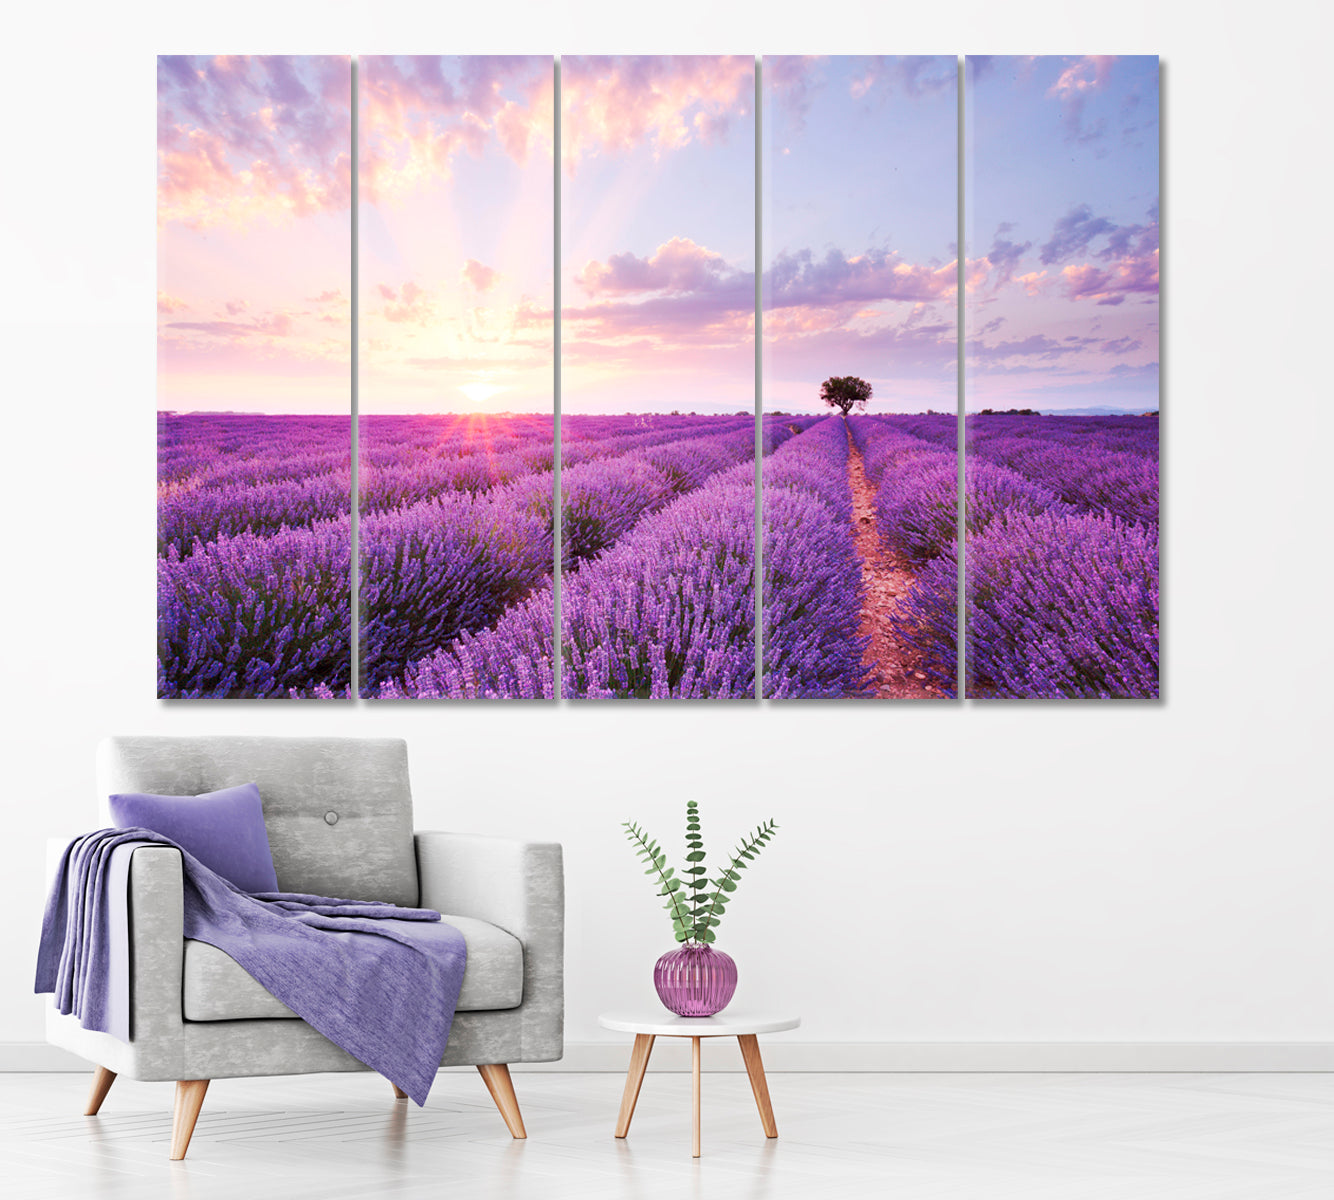 Lavender Field at Sunset Canvas Print ArtLexy 5 Panels 36"x24" inches 